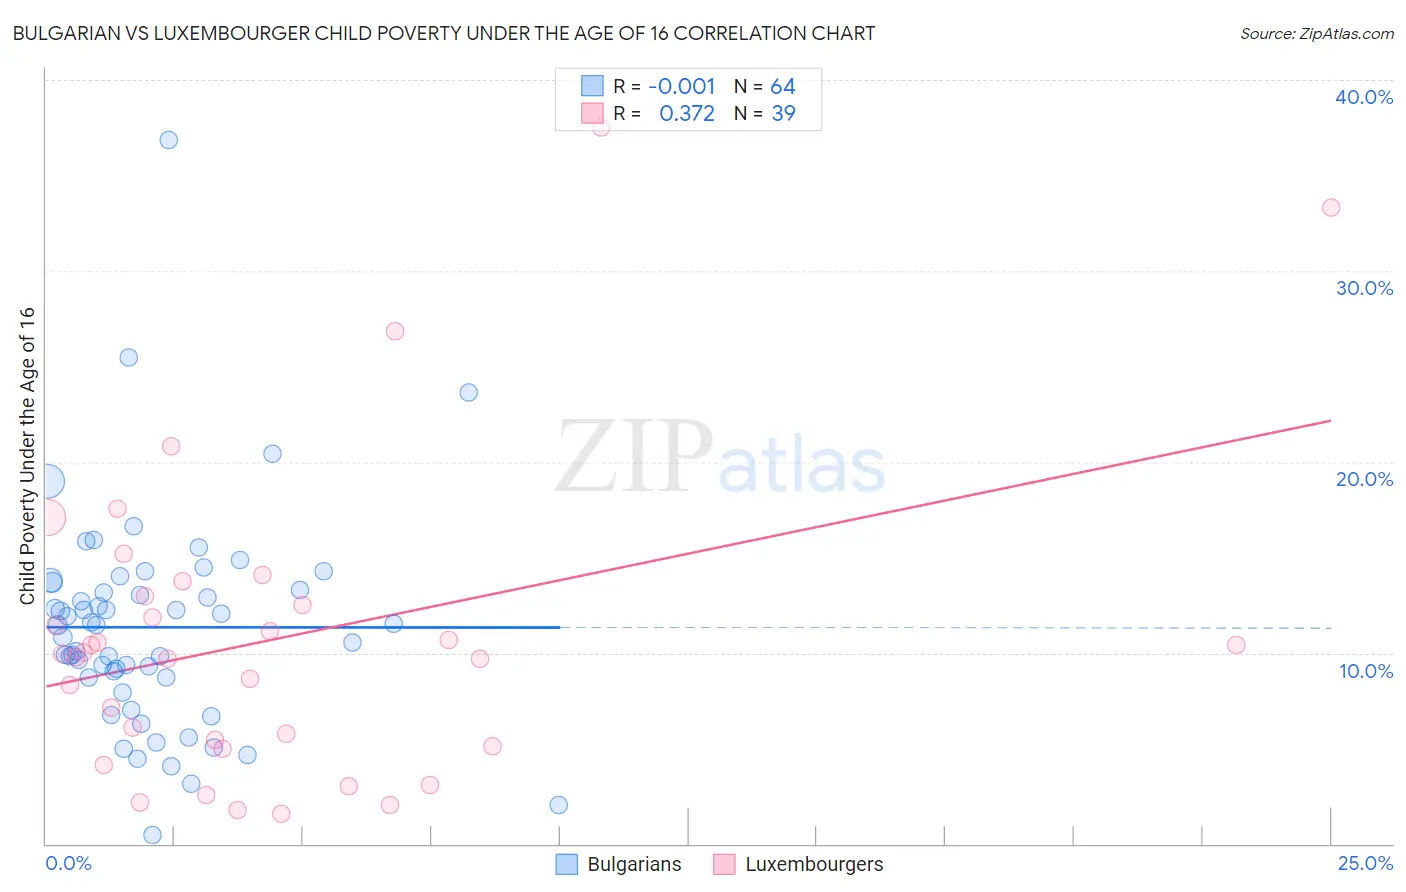 Bulgarian vs Luxembourger Child Poverty Under the Age of 16